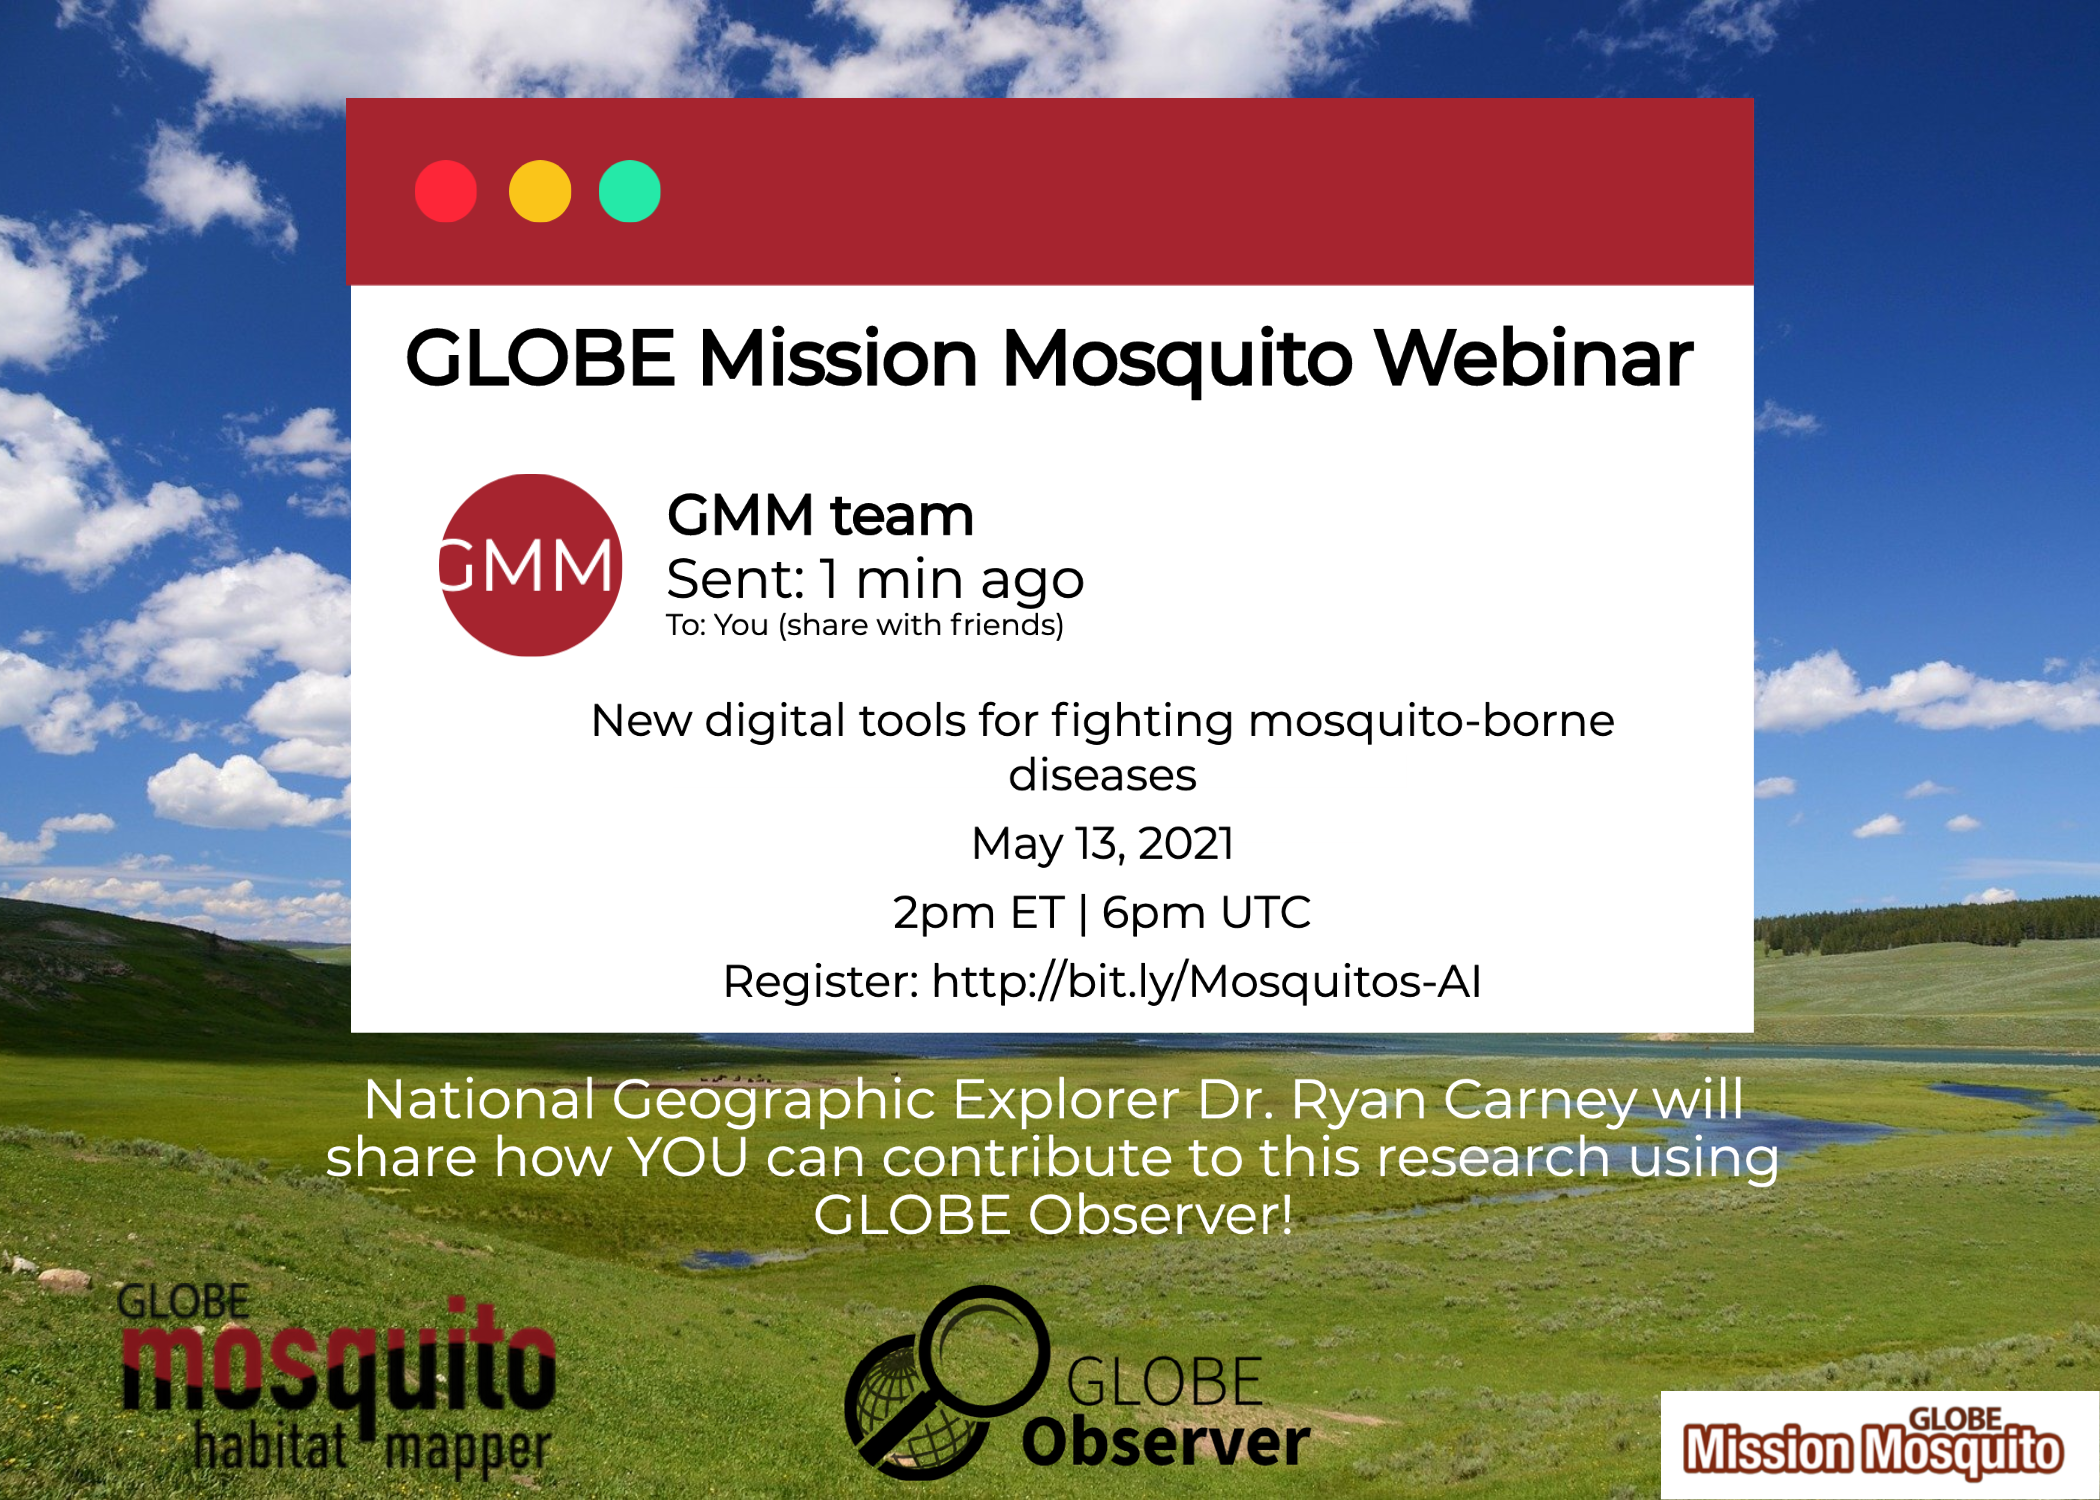 GLOBE Mission Mosquito 13 May 2021 webinar shareable